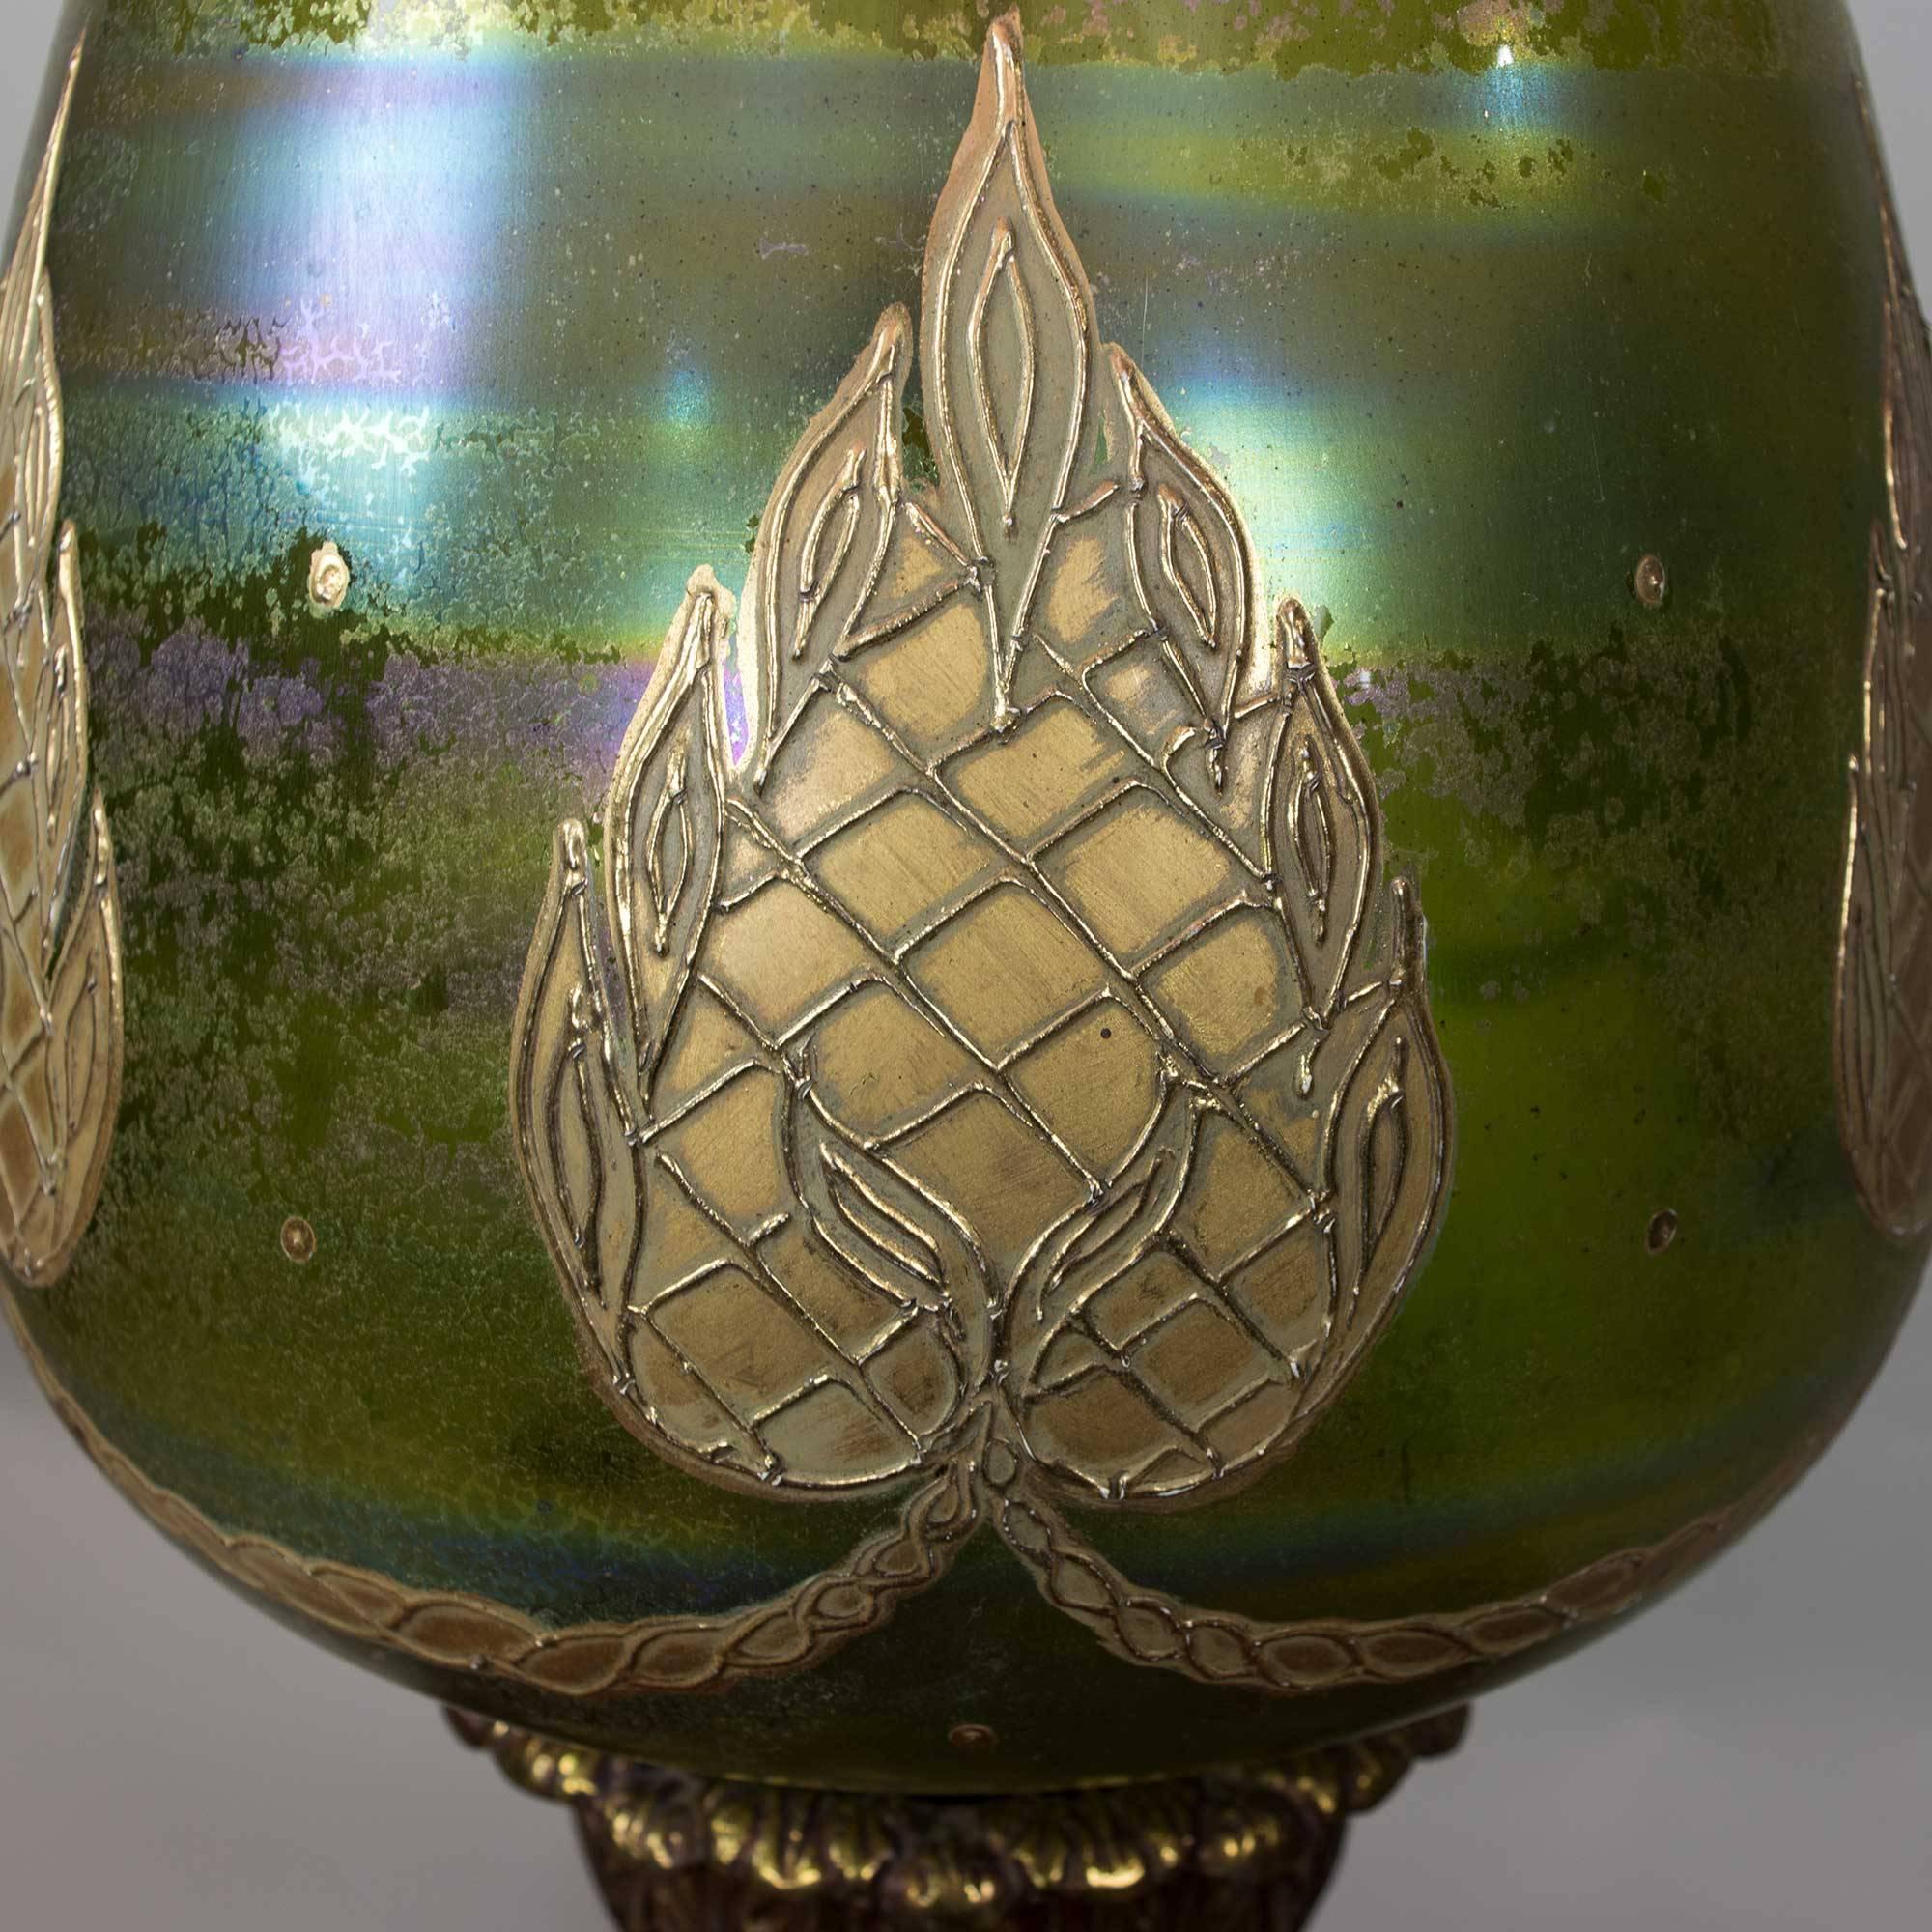 Eye-catching extra-large green glass table lamp with gorgeous hand-painted design in an aged gold tone and additional subtle colors including blues and purples. Additional details include the square base with an aged treatment in a dark metal tone